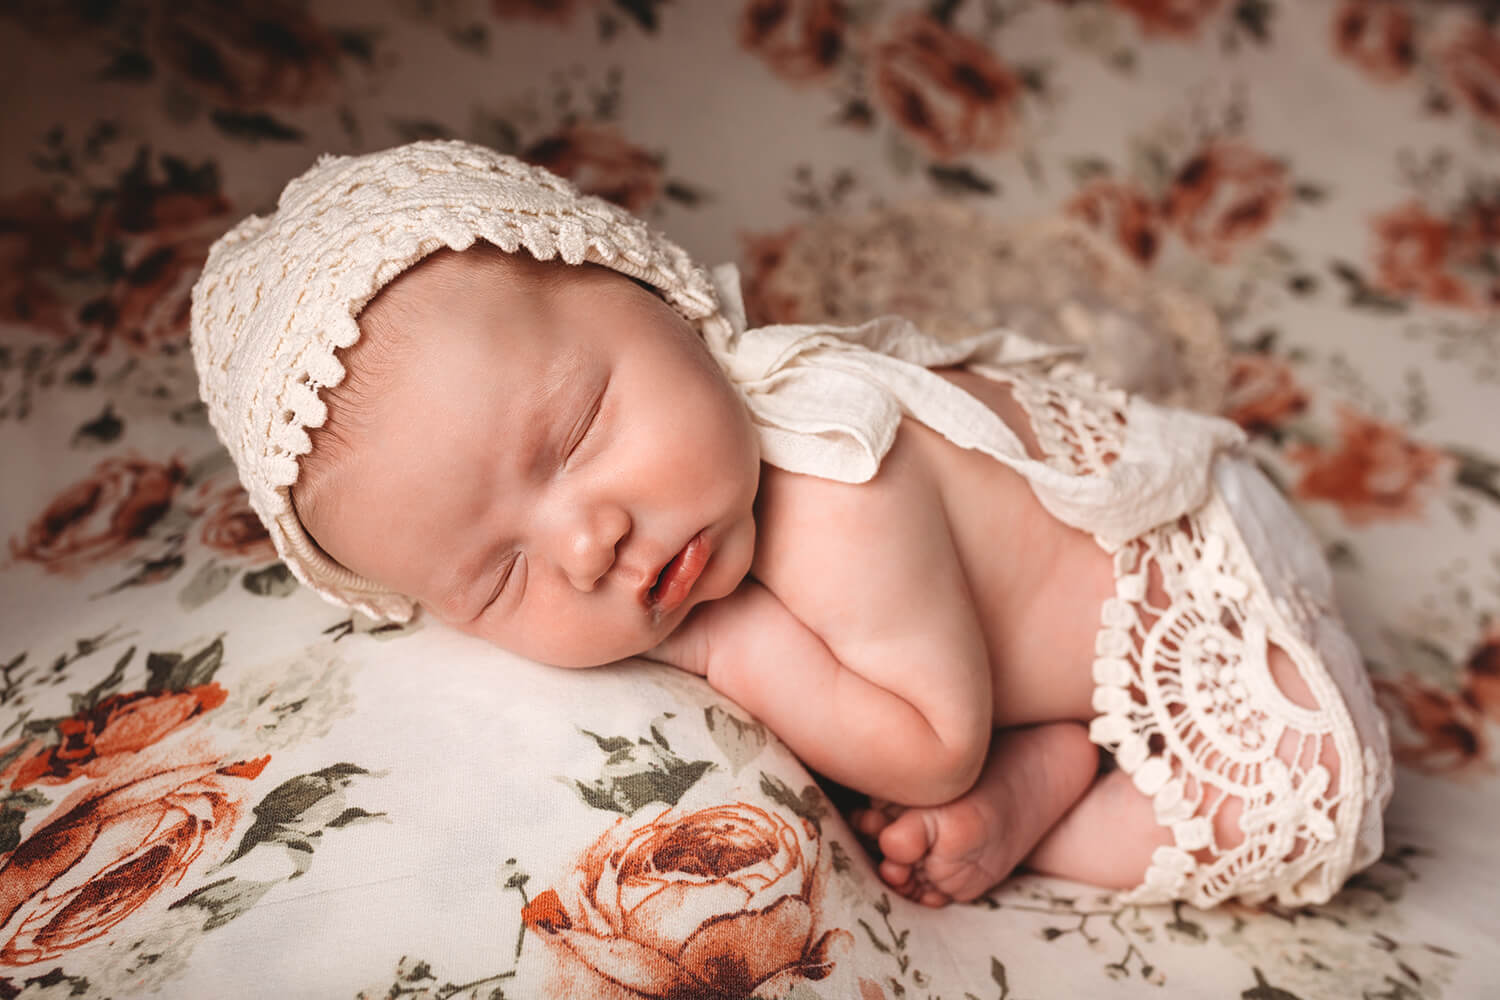 Photo of newborn on bed with bonnet.